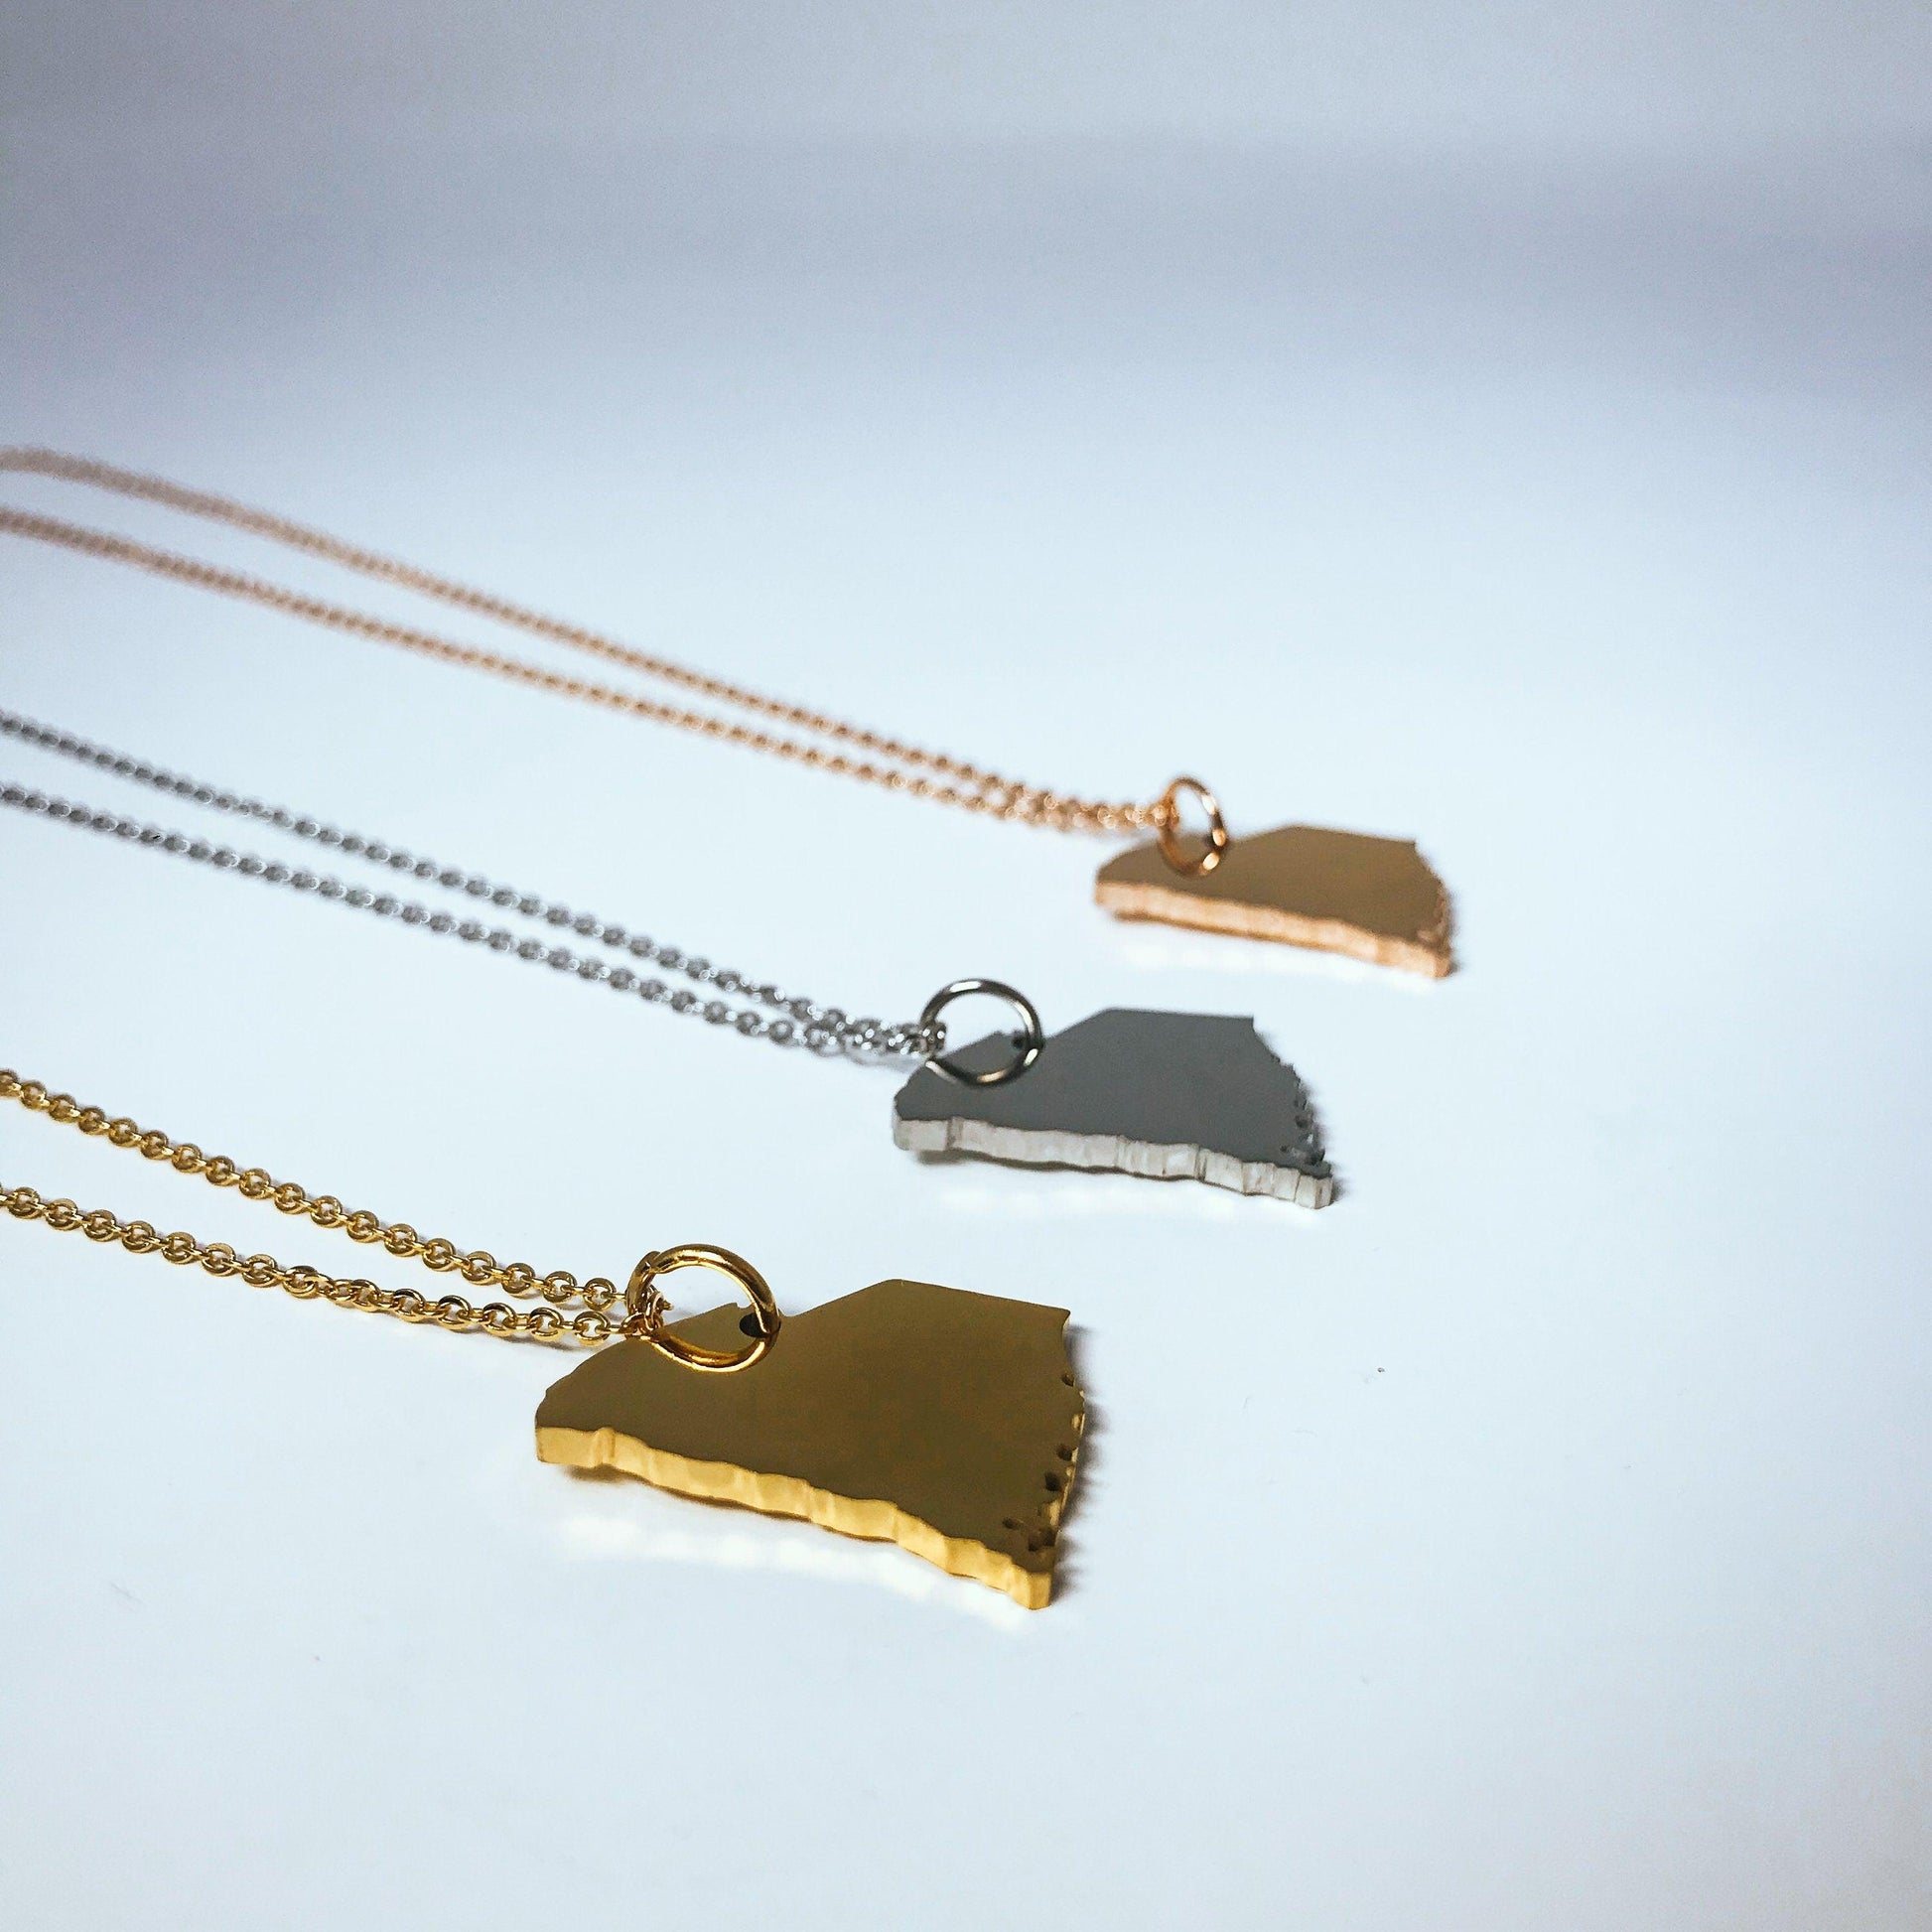 South Carolina State Silhouette Necklaces in 3 different colors: Gold, Silver & Rose Gold